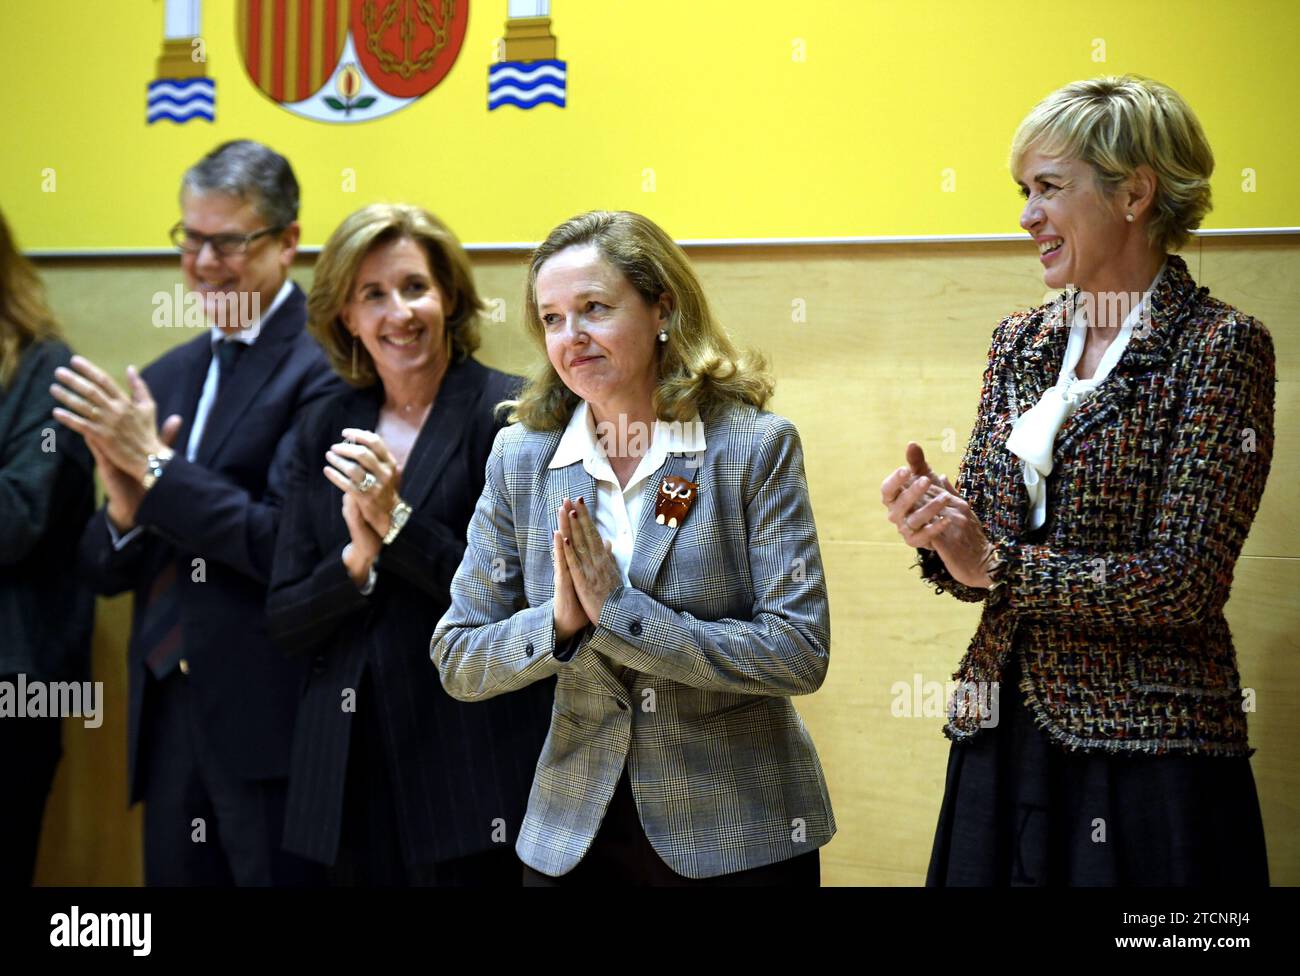 Madrid, 02/12/2020. The Third Vice President and Minister of Economic Affairs, Nadia Calviño, apologizes for arriving late for the inauguration of senior officials in her department. Photo: Oscar del Pozo. ARCHDC. Credit: Album / Archivo ABC / Oscar del Pozo Stock Photo